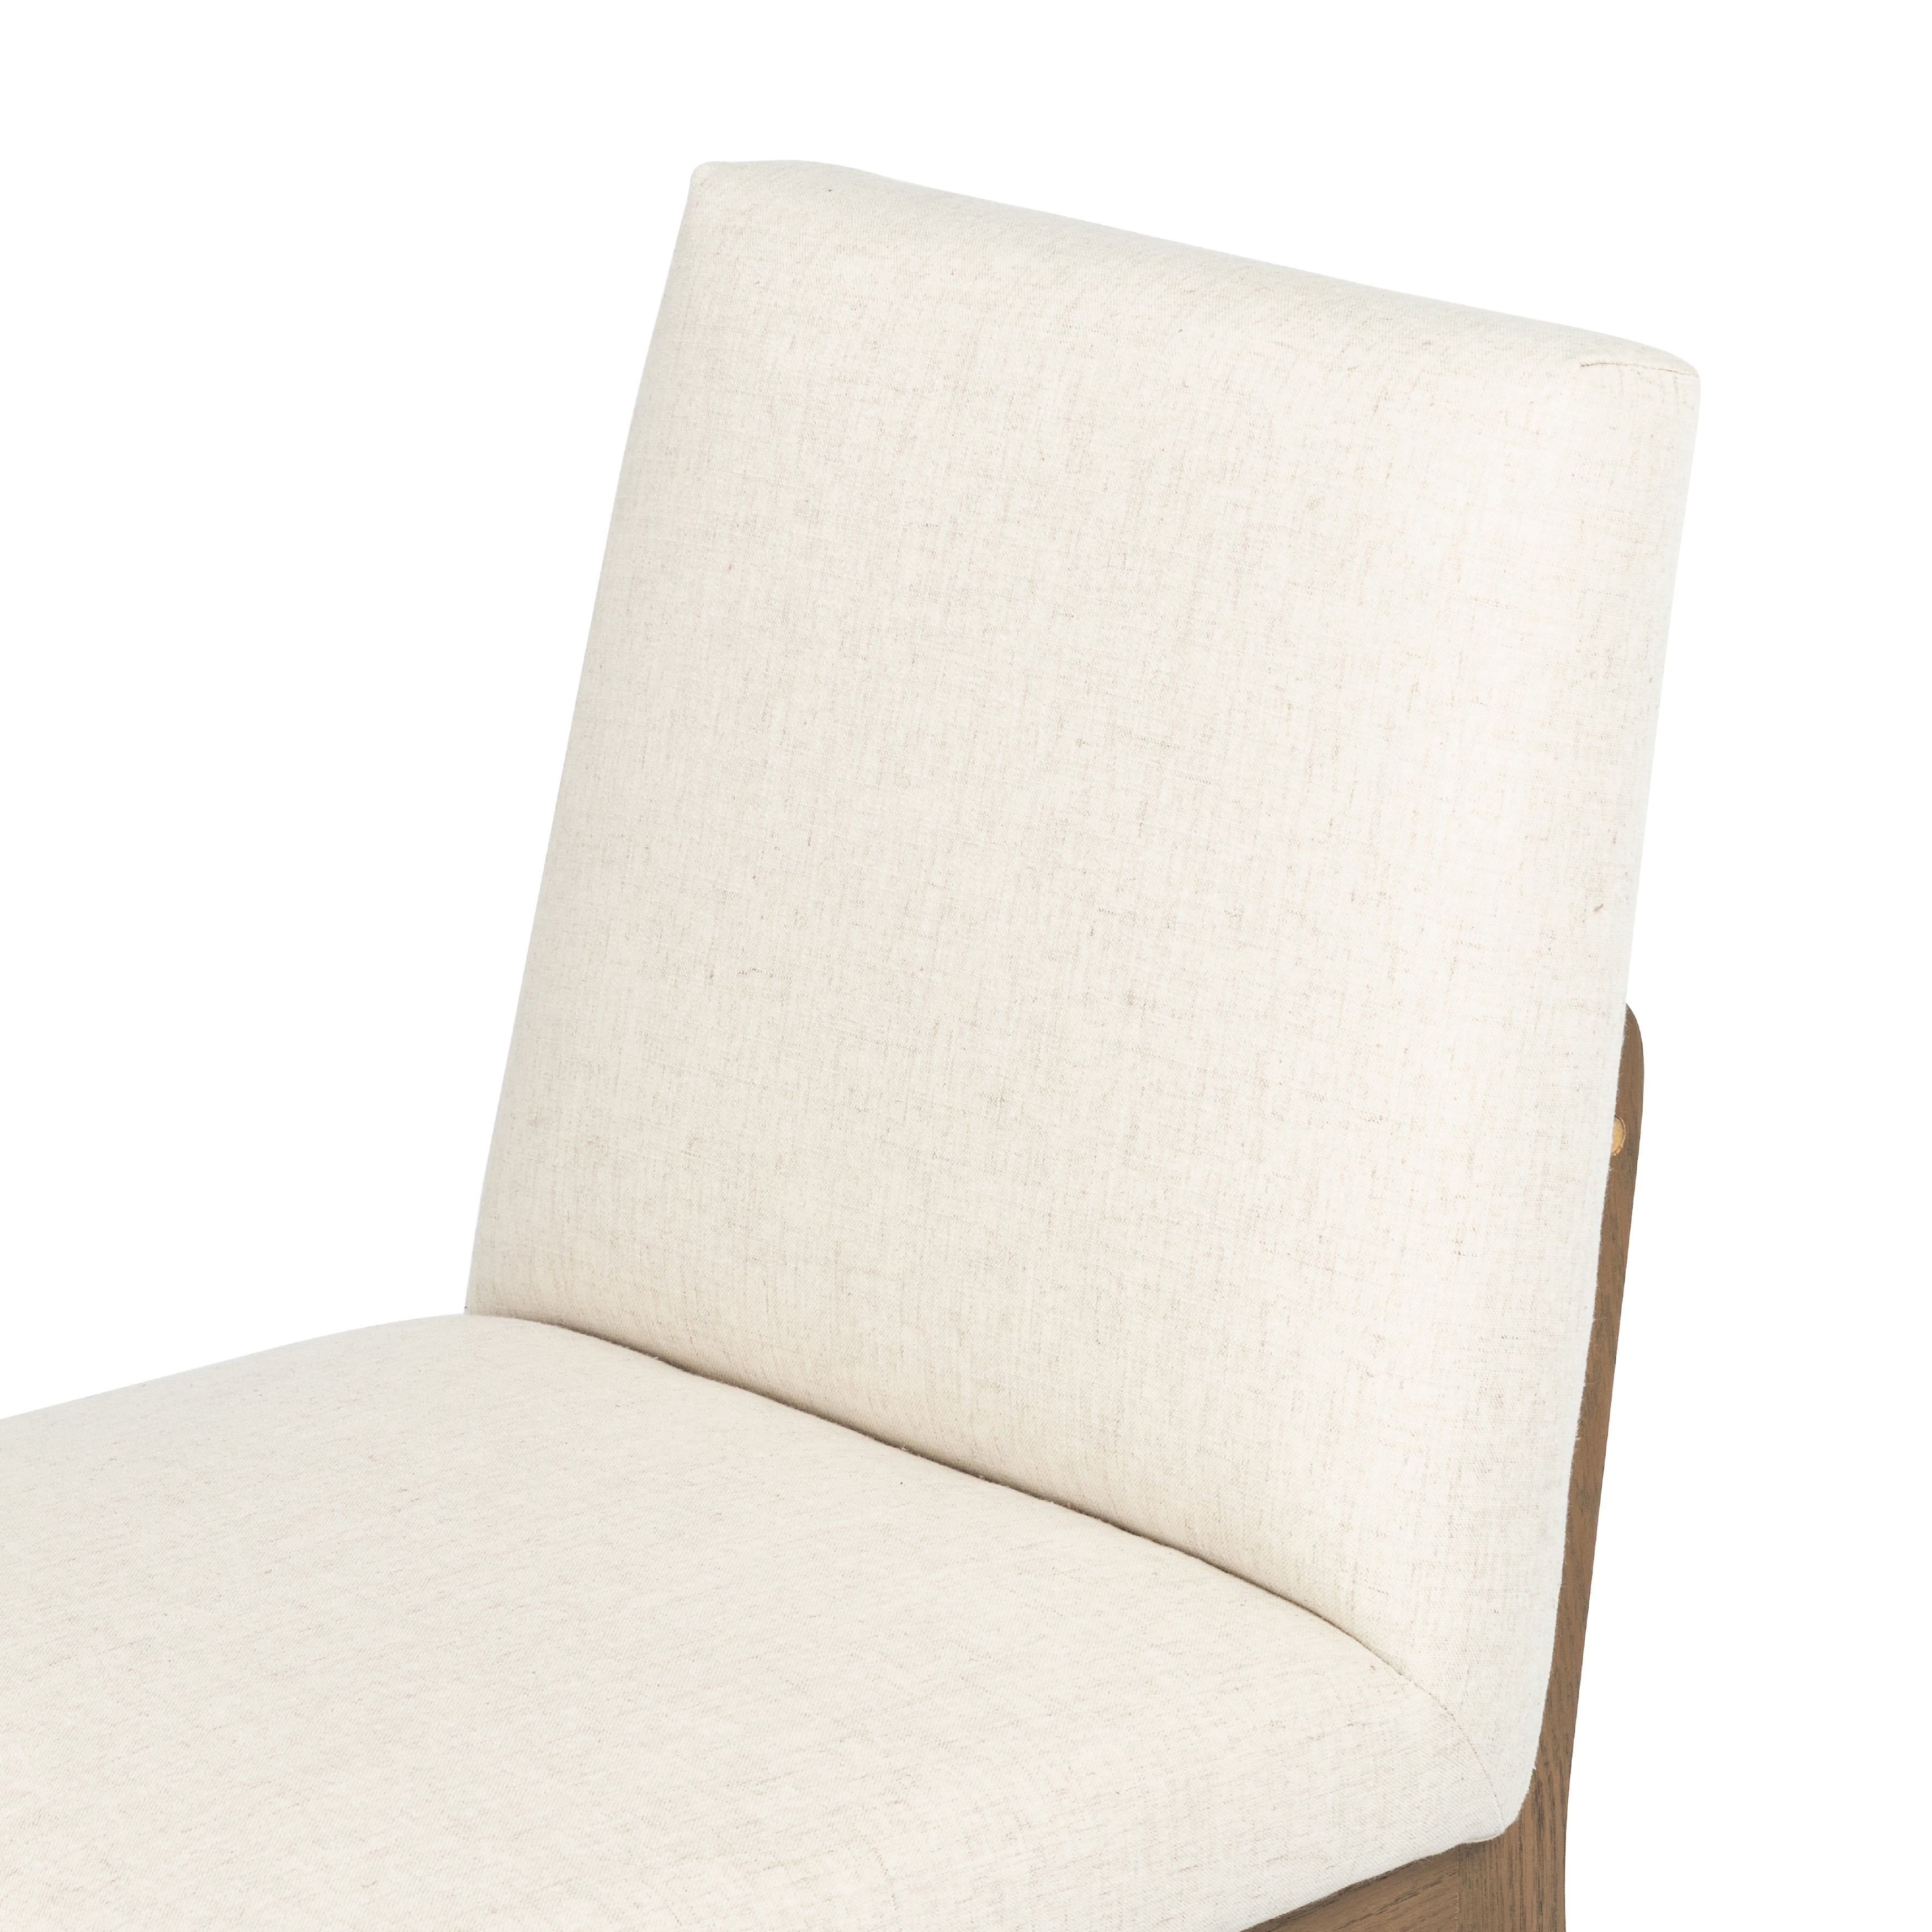 Emma Dining Chair